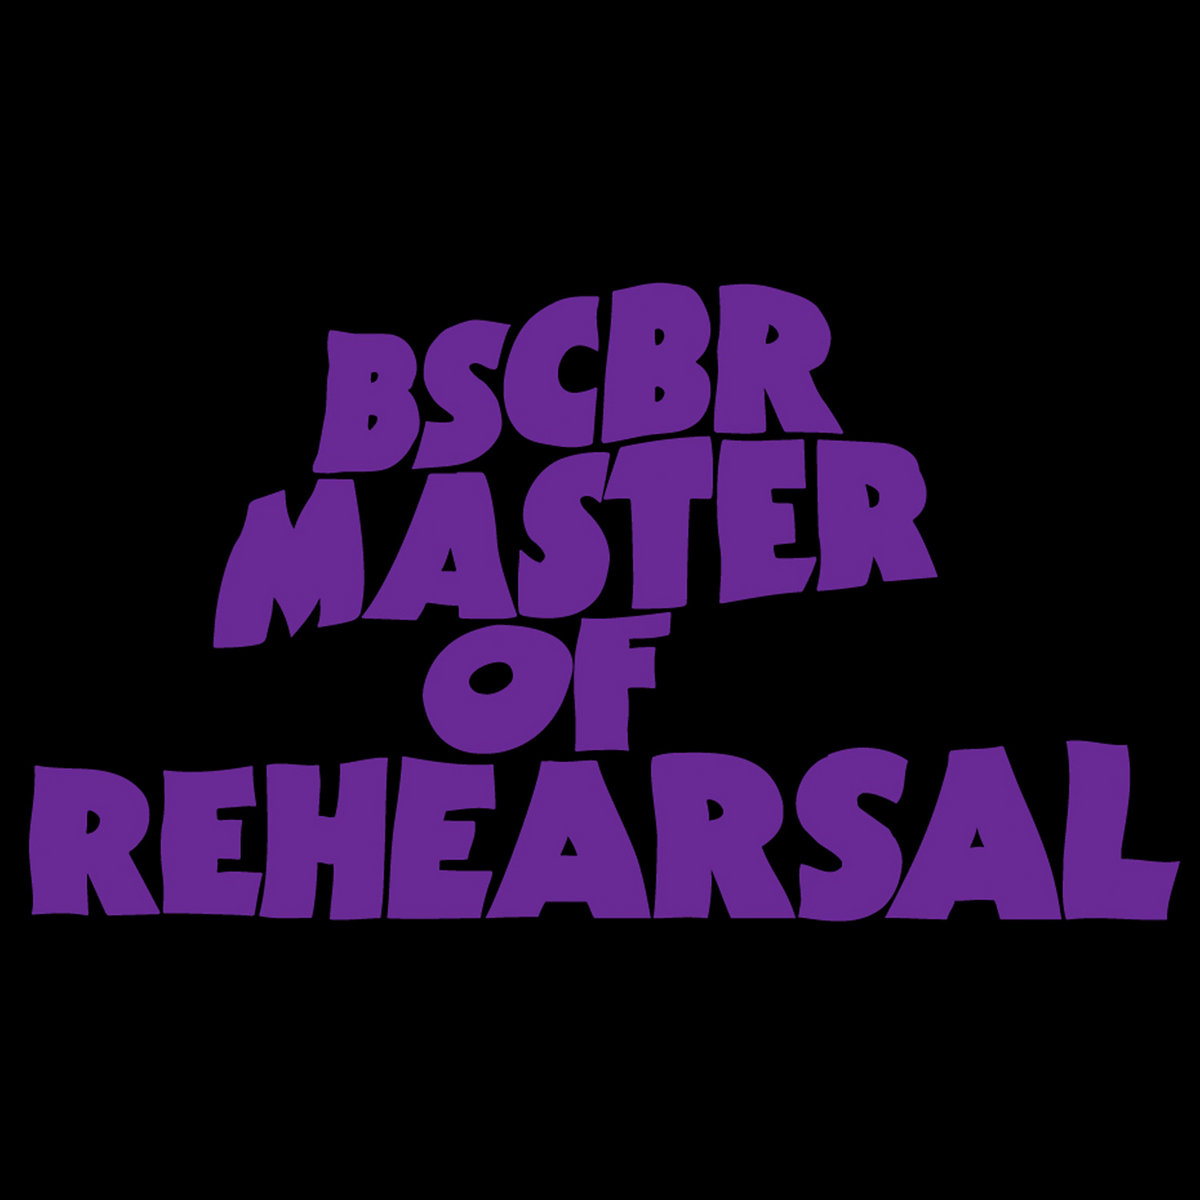 BSCBR Master of Rehearsal